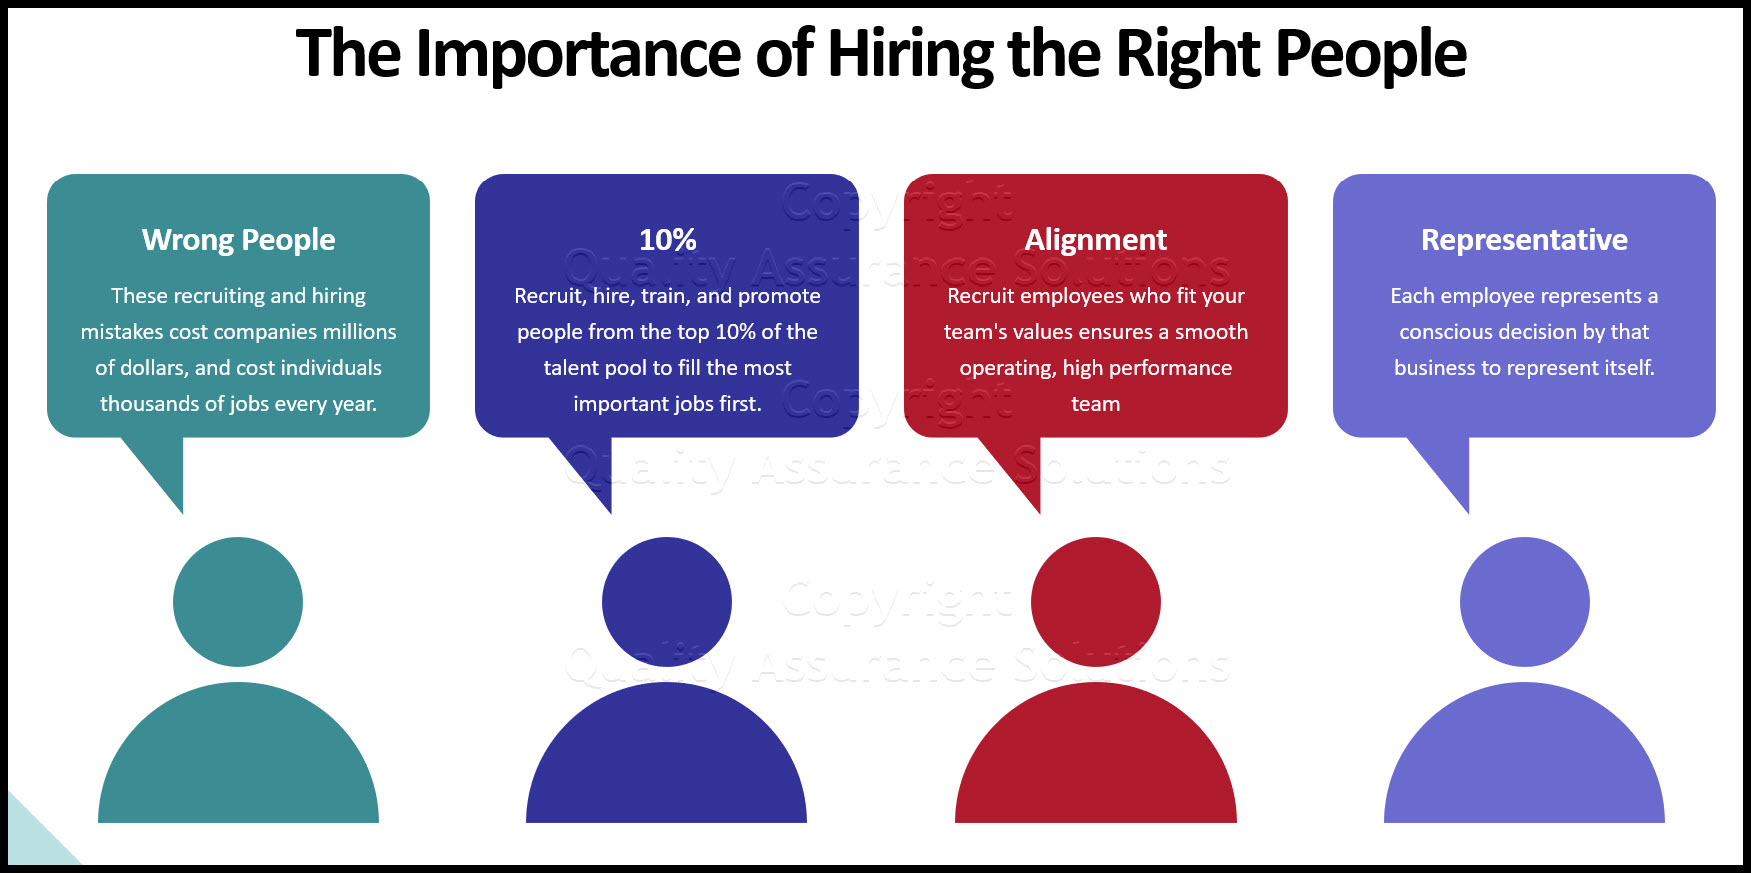  Hiring the right people